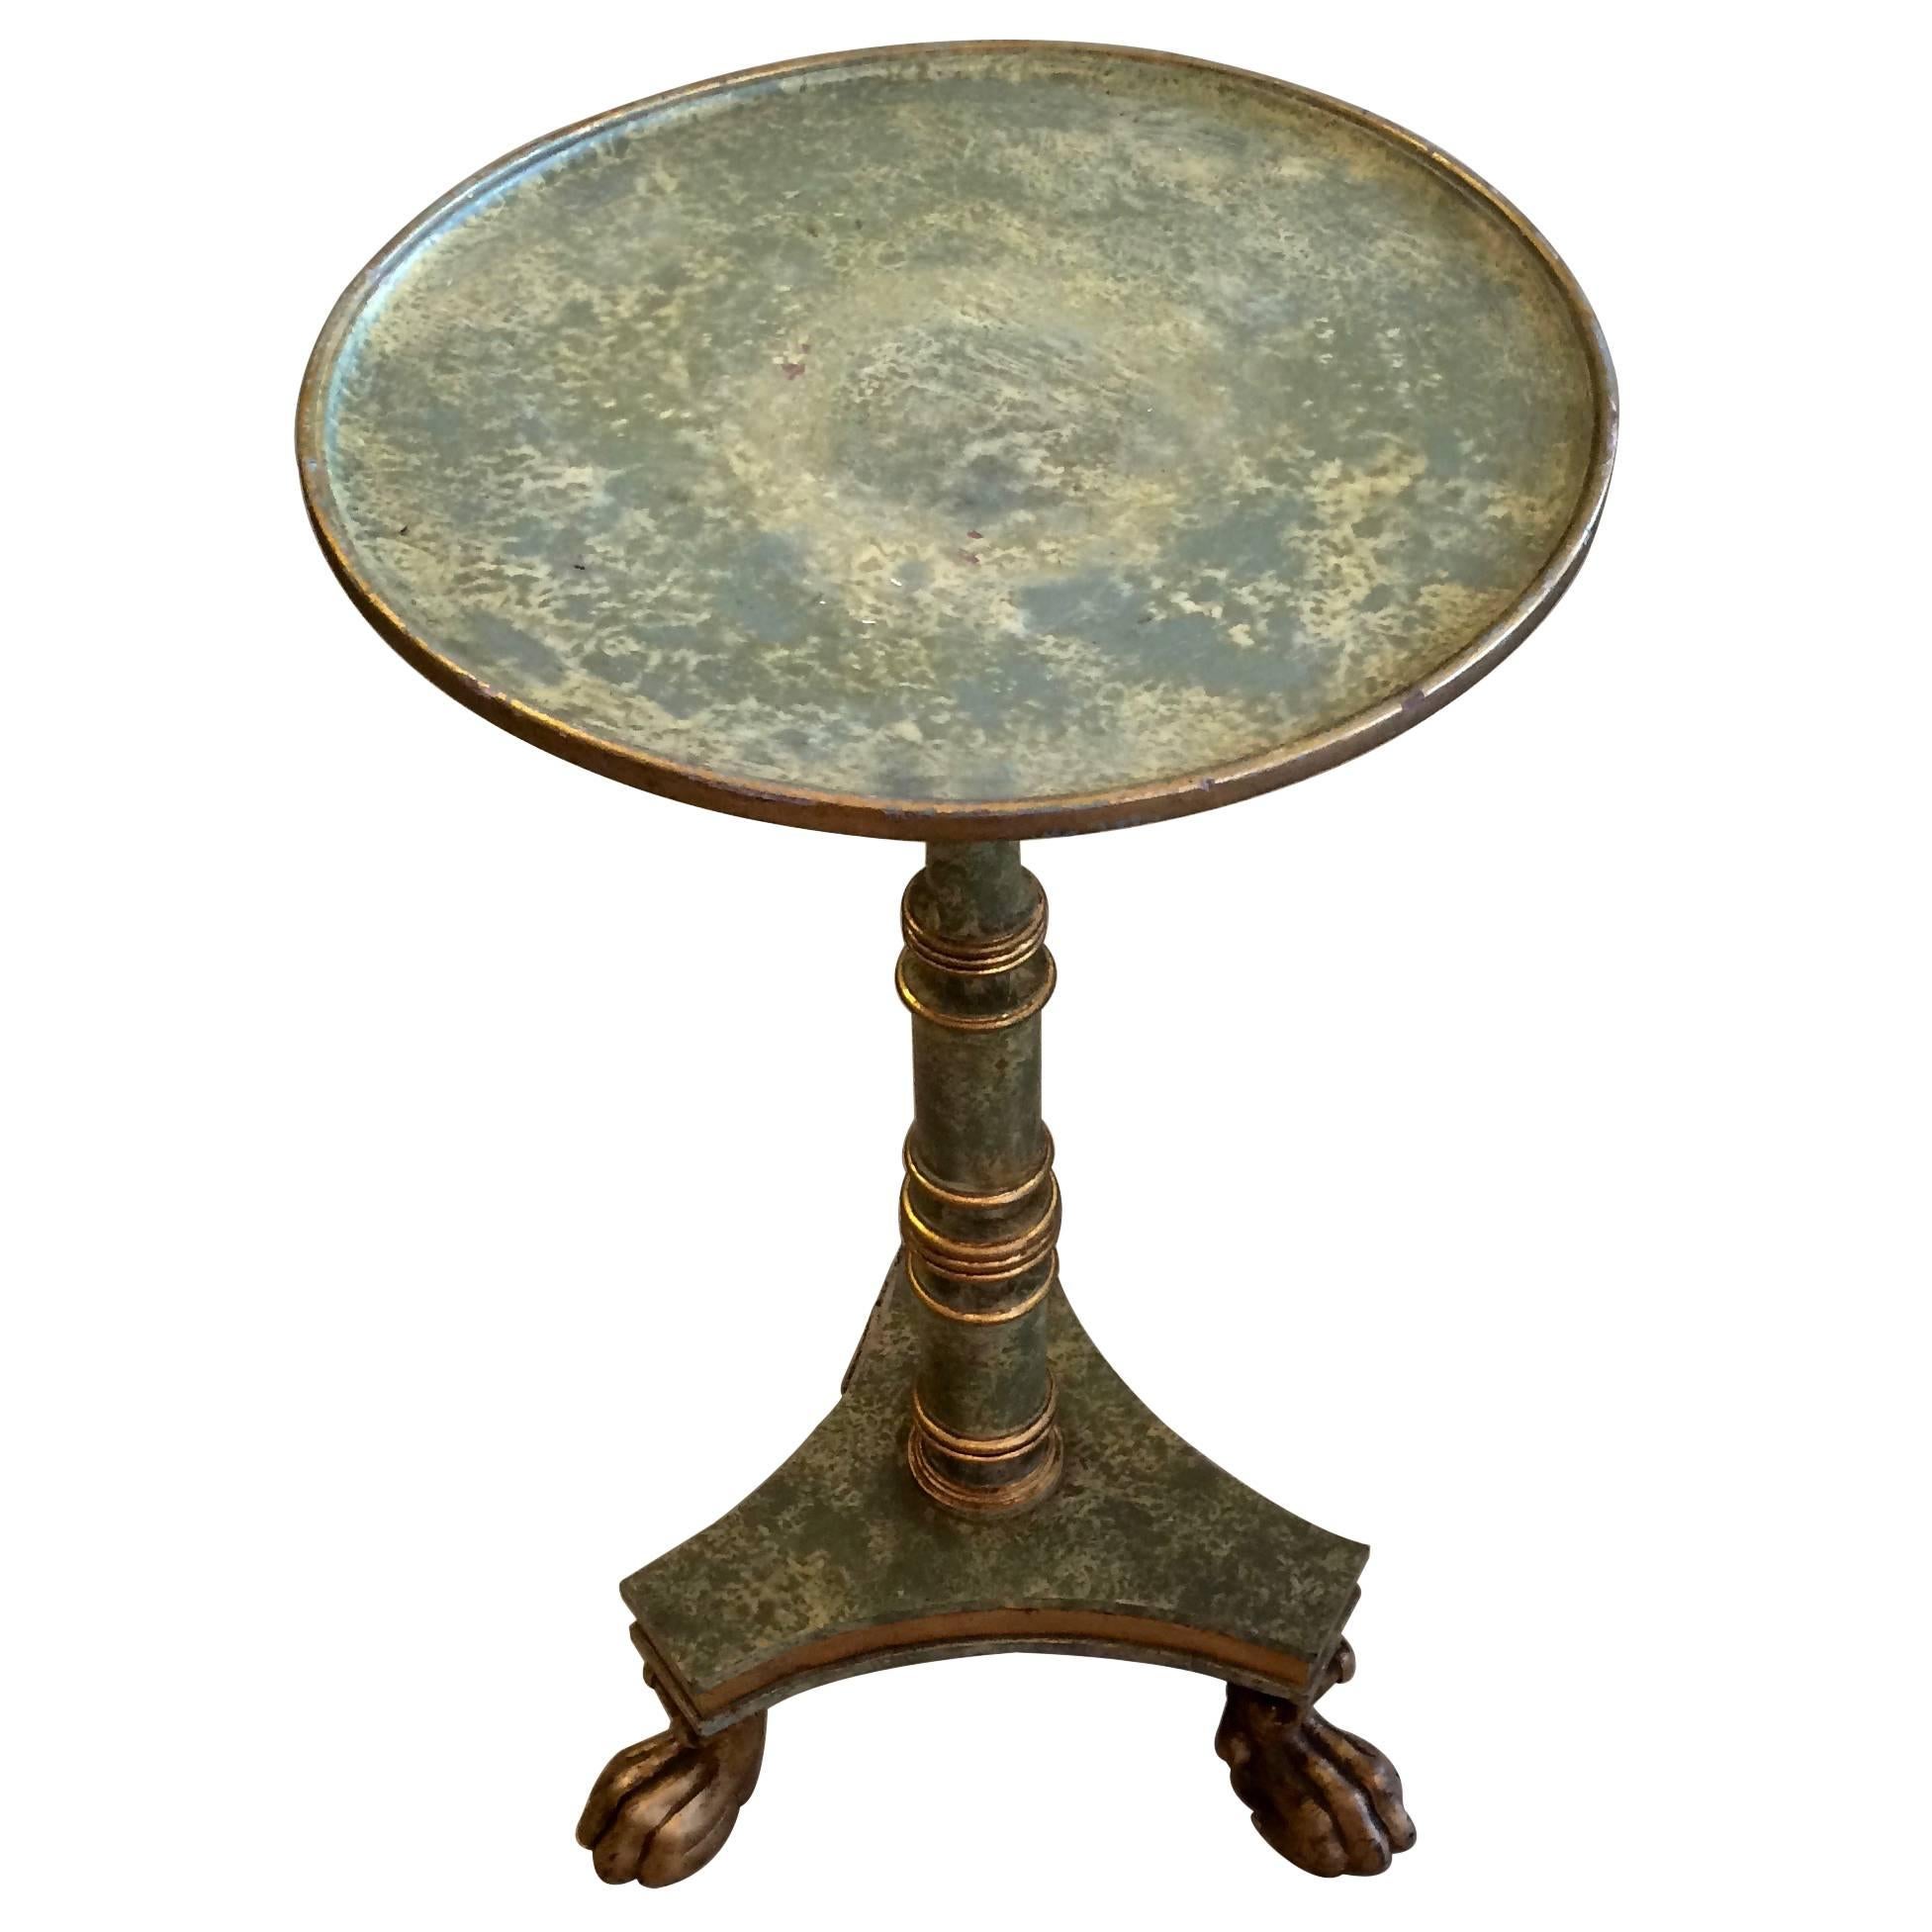 Glamorous Venetian Faux Painted & Gilded Round Side Drinks Table